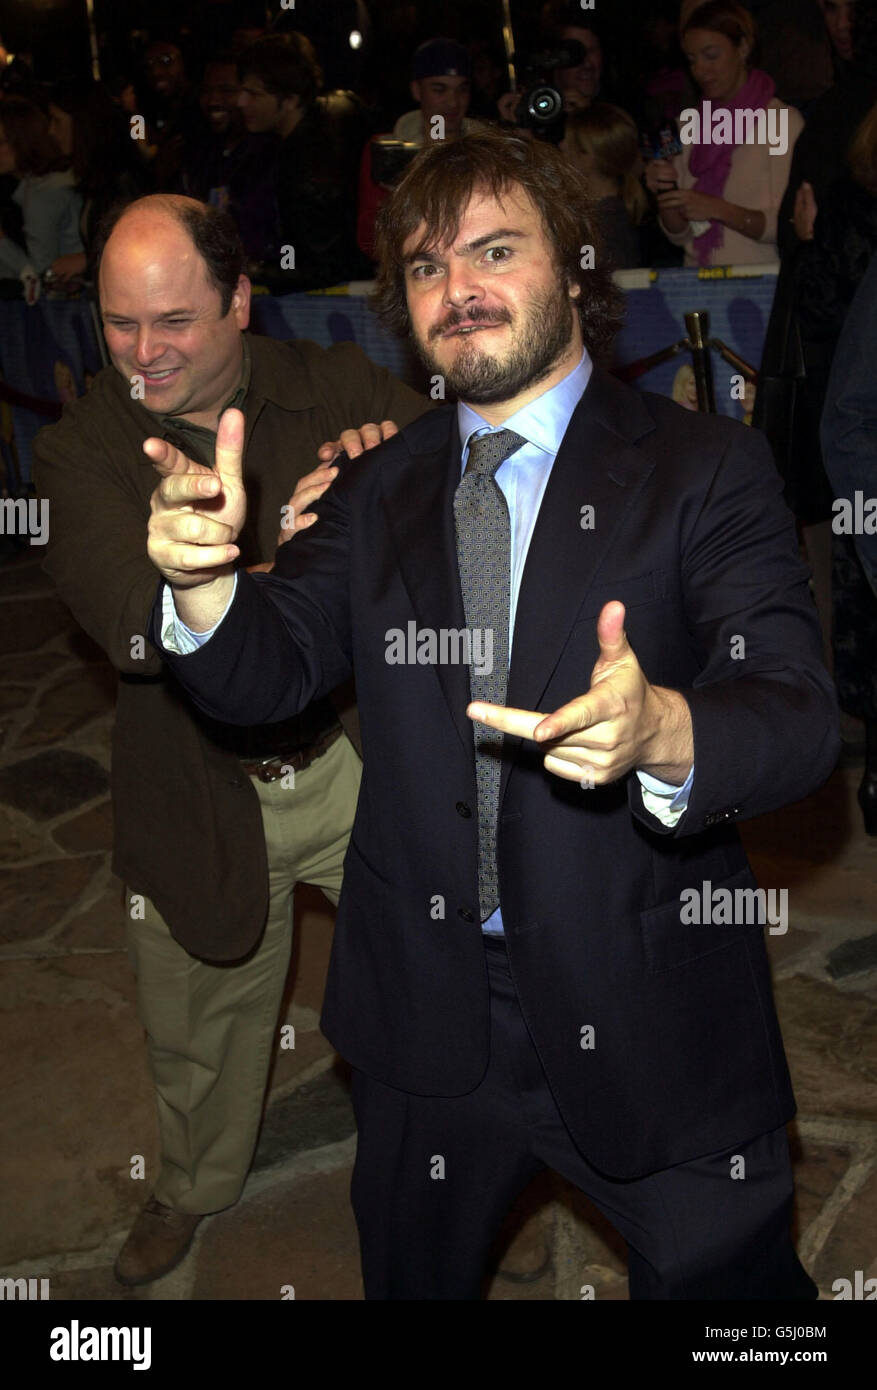 Jack Black (right) arrives at the premiere of his new film Shallow Hal being given a gentle push by former Seinfeld actor Jason Alexander at the Manns Village Theatre in Los Angeles. Stock Photo